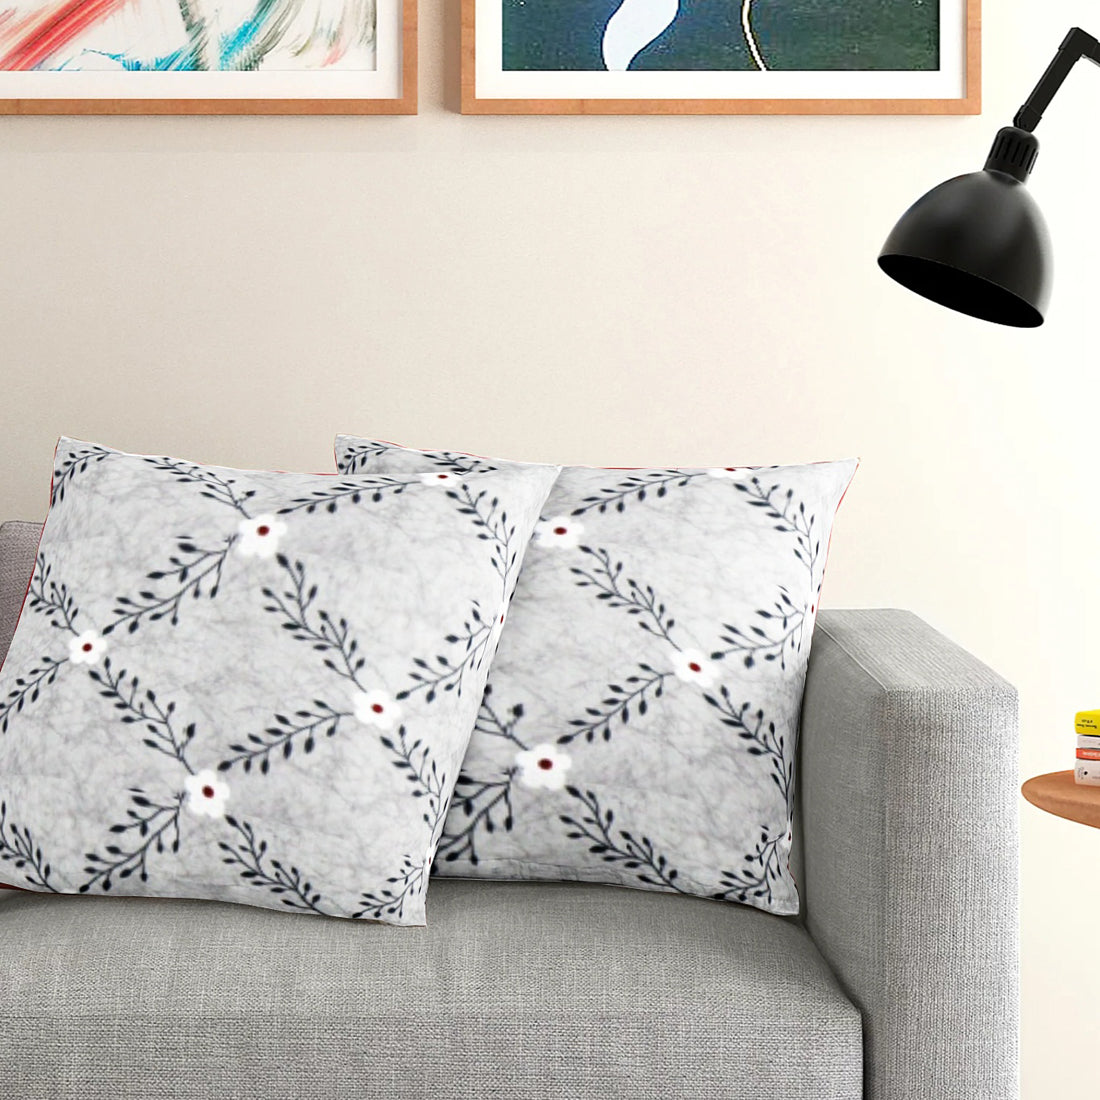 Printed Floral Cotton Cushion Cover set - Grey